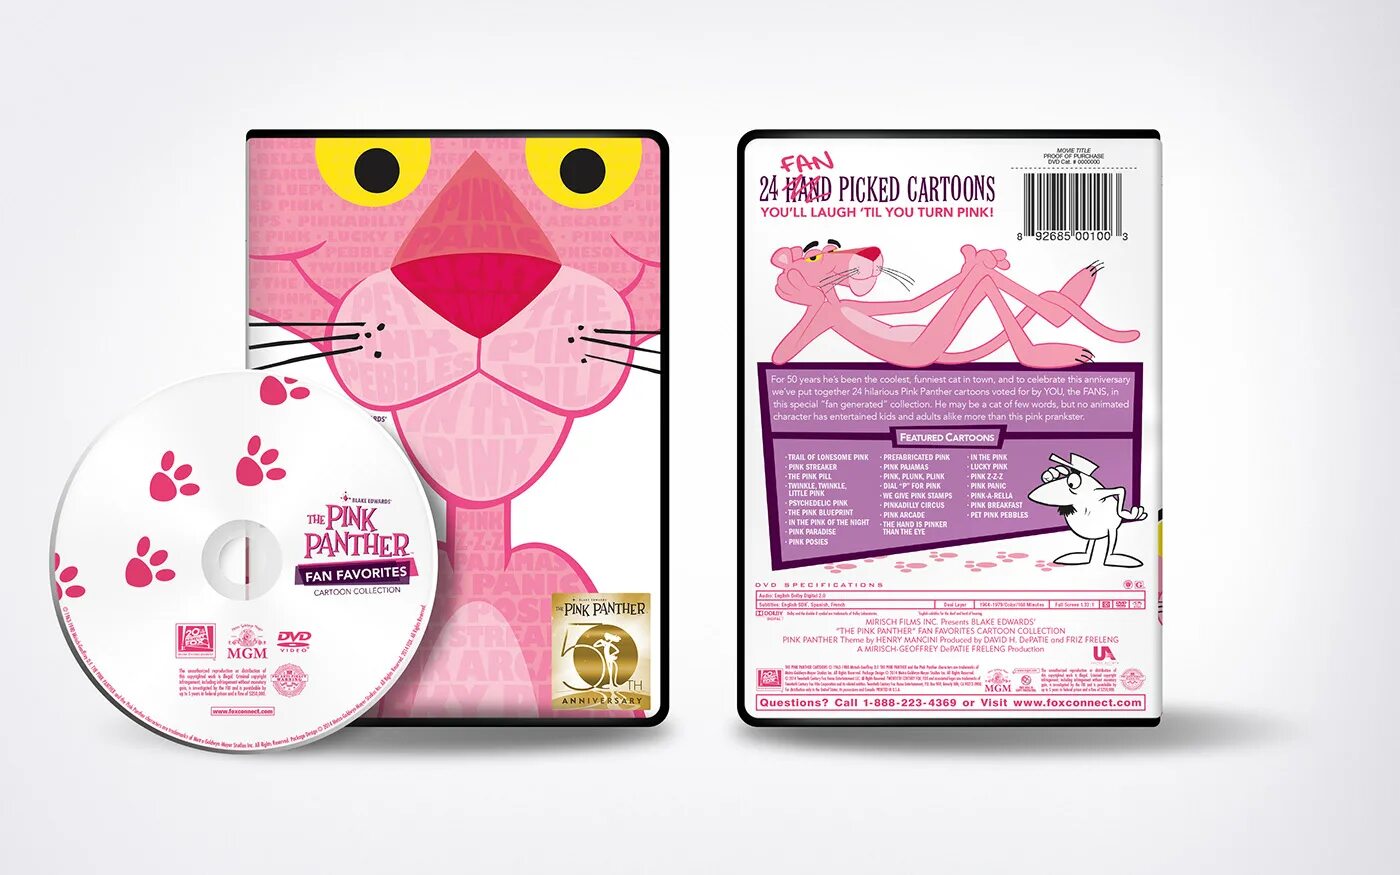 Fan favorite. Пинк, пантер, двд. Trail of the Pink Panther. Dial Pink Pink Panther. Pink Panther Pink Plunk Plink.